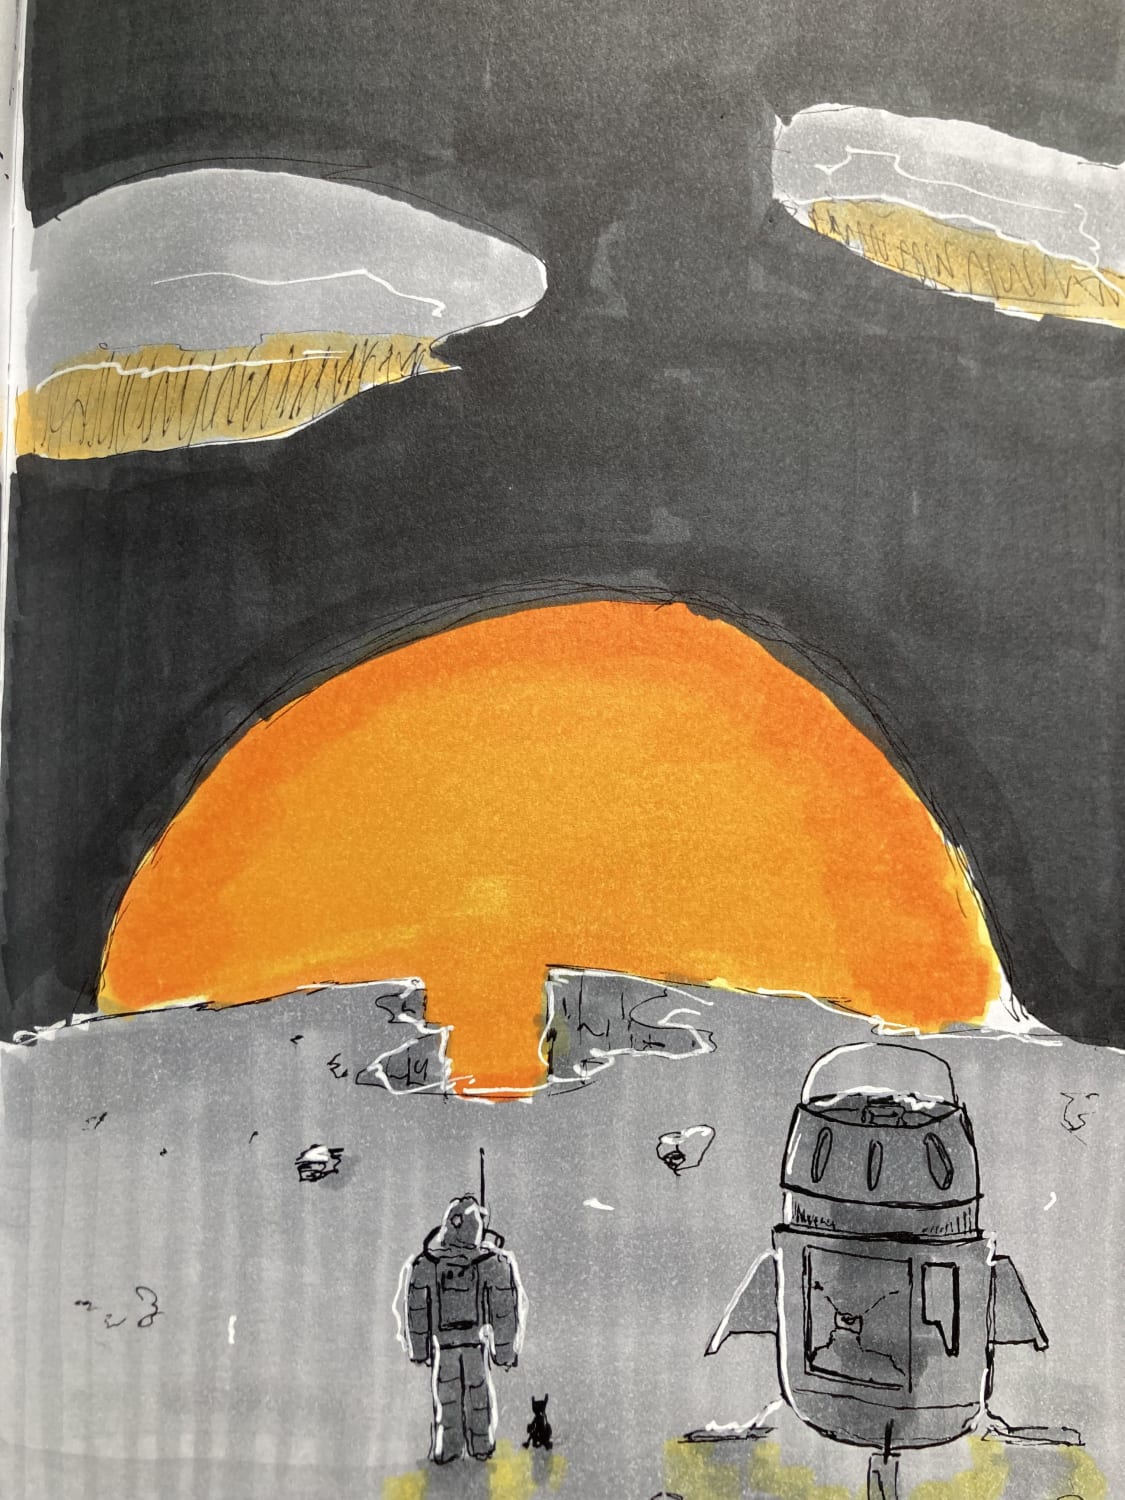 The last day on earth. I used copics and a pilot hitec pen